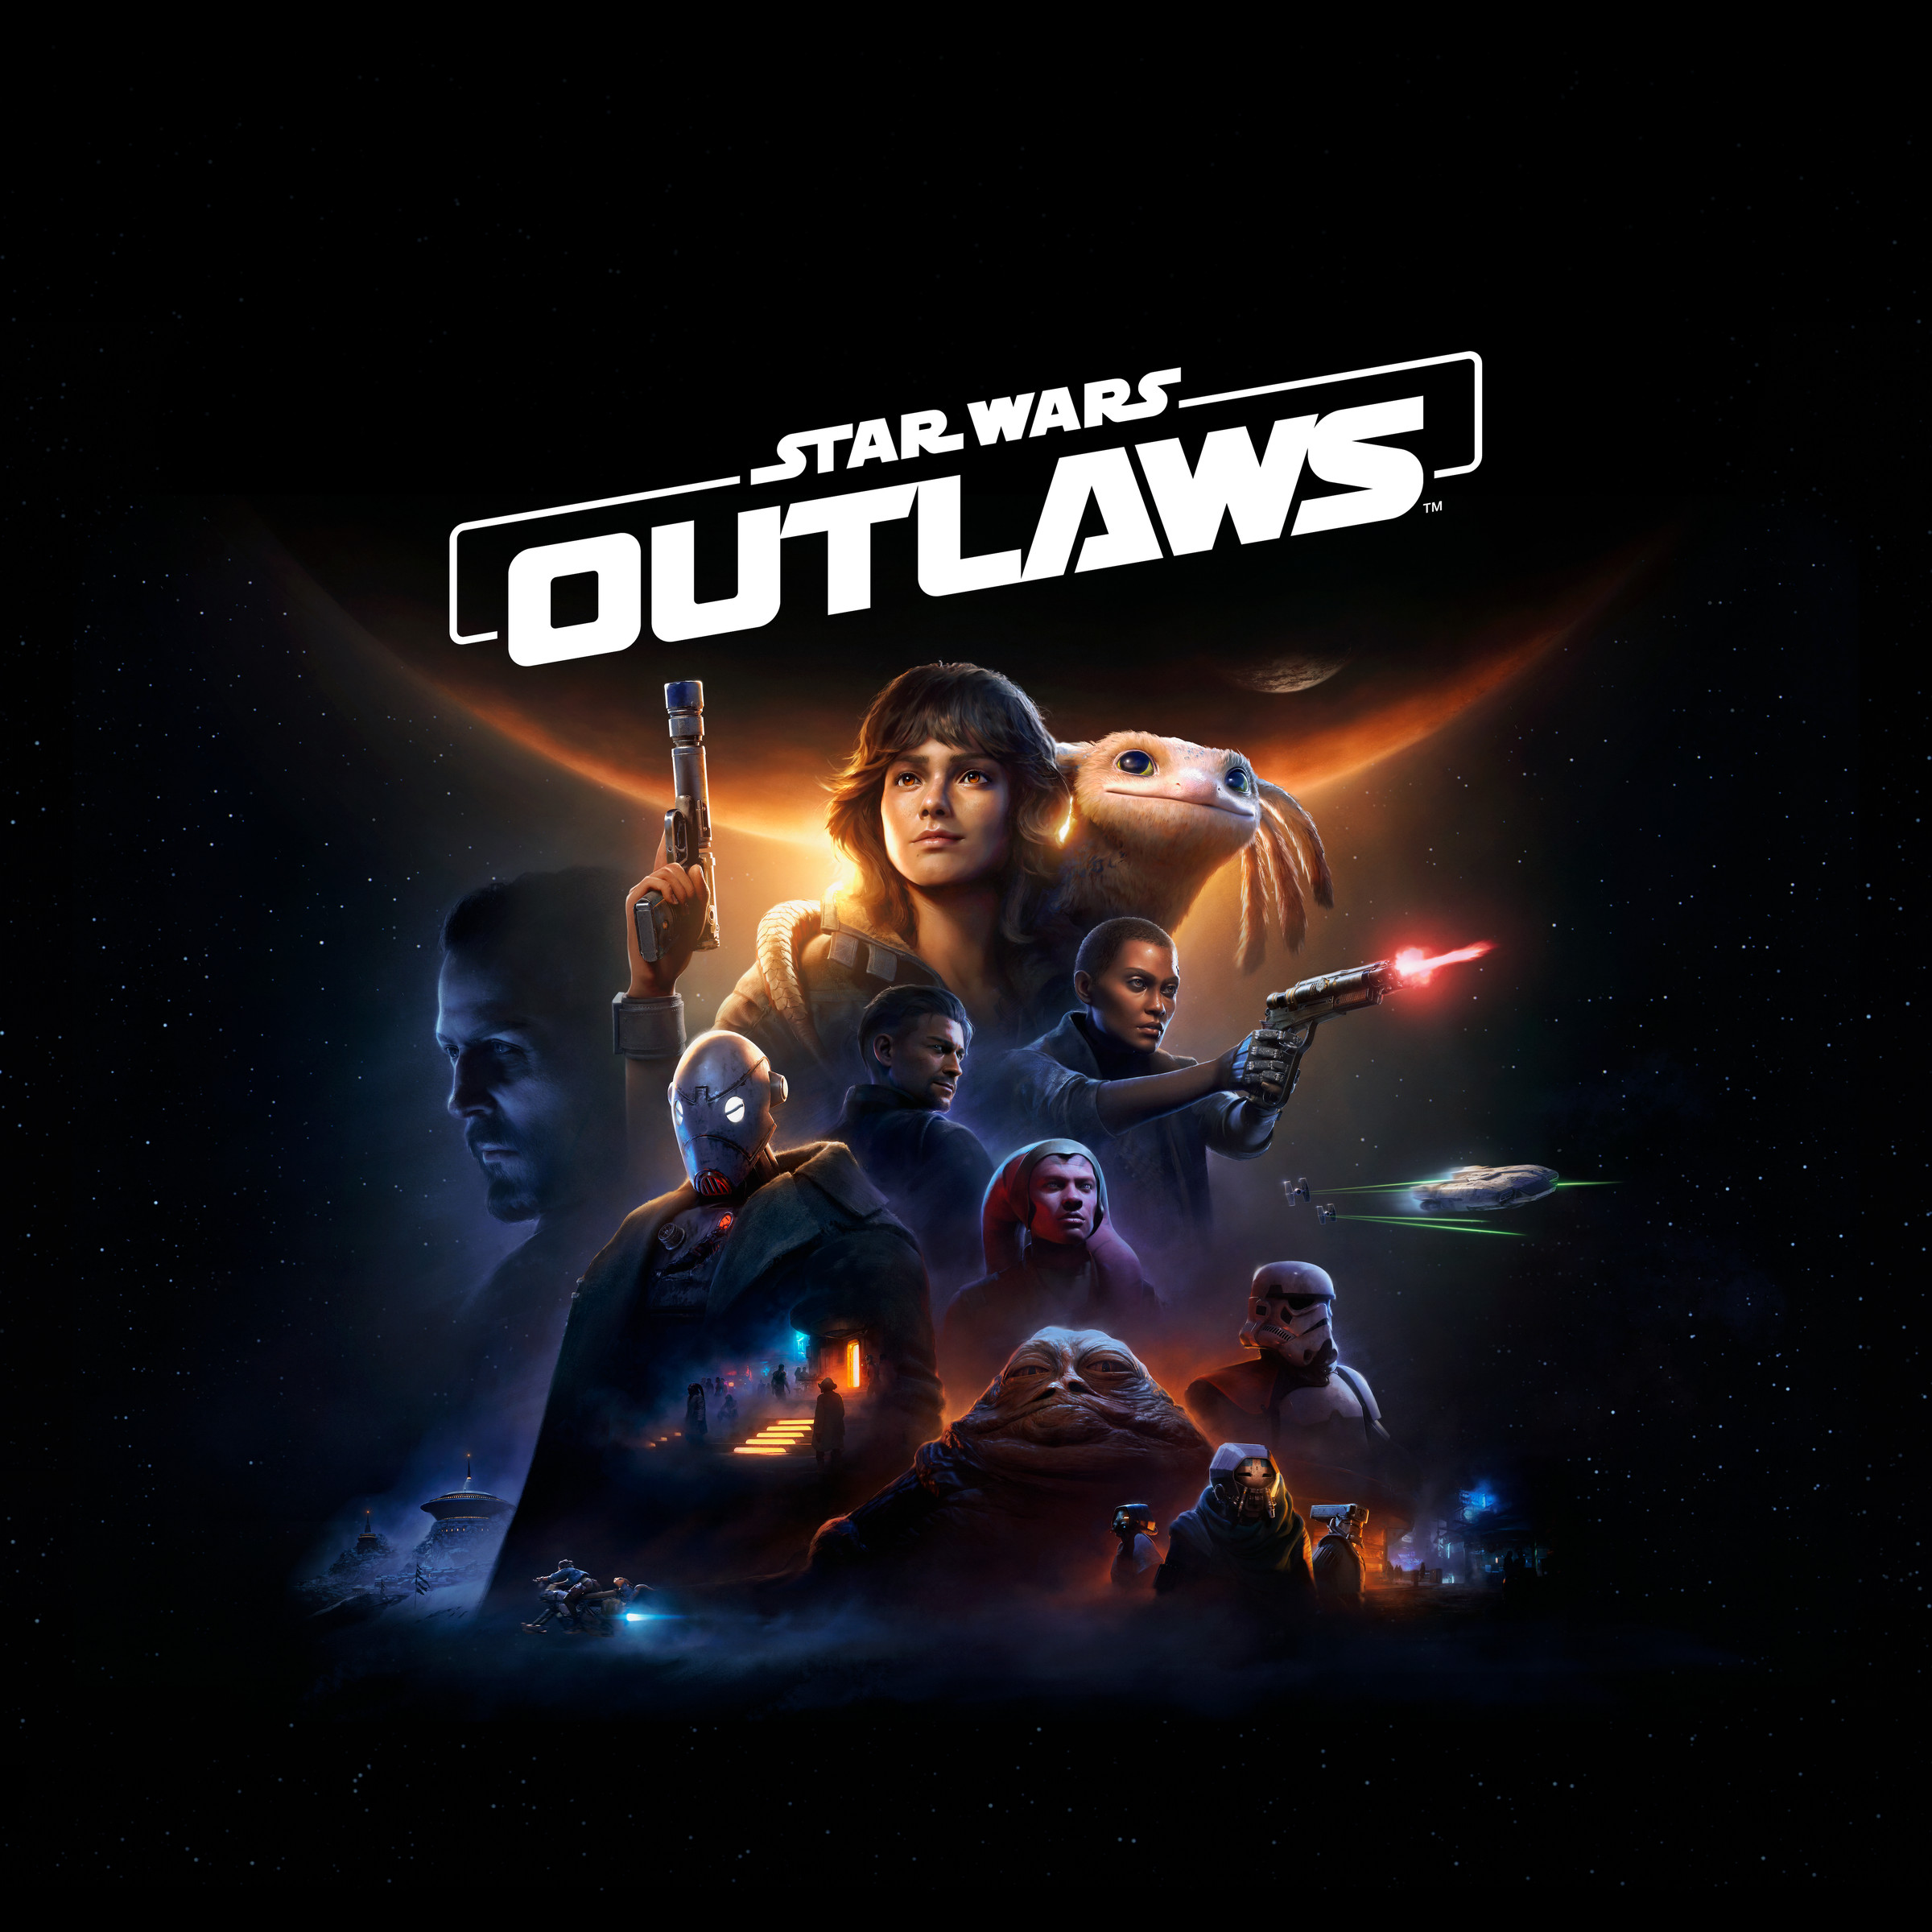 Promotional art for the video game Star Wars Outlaws.